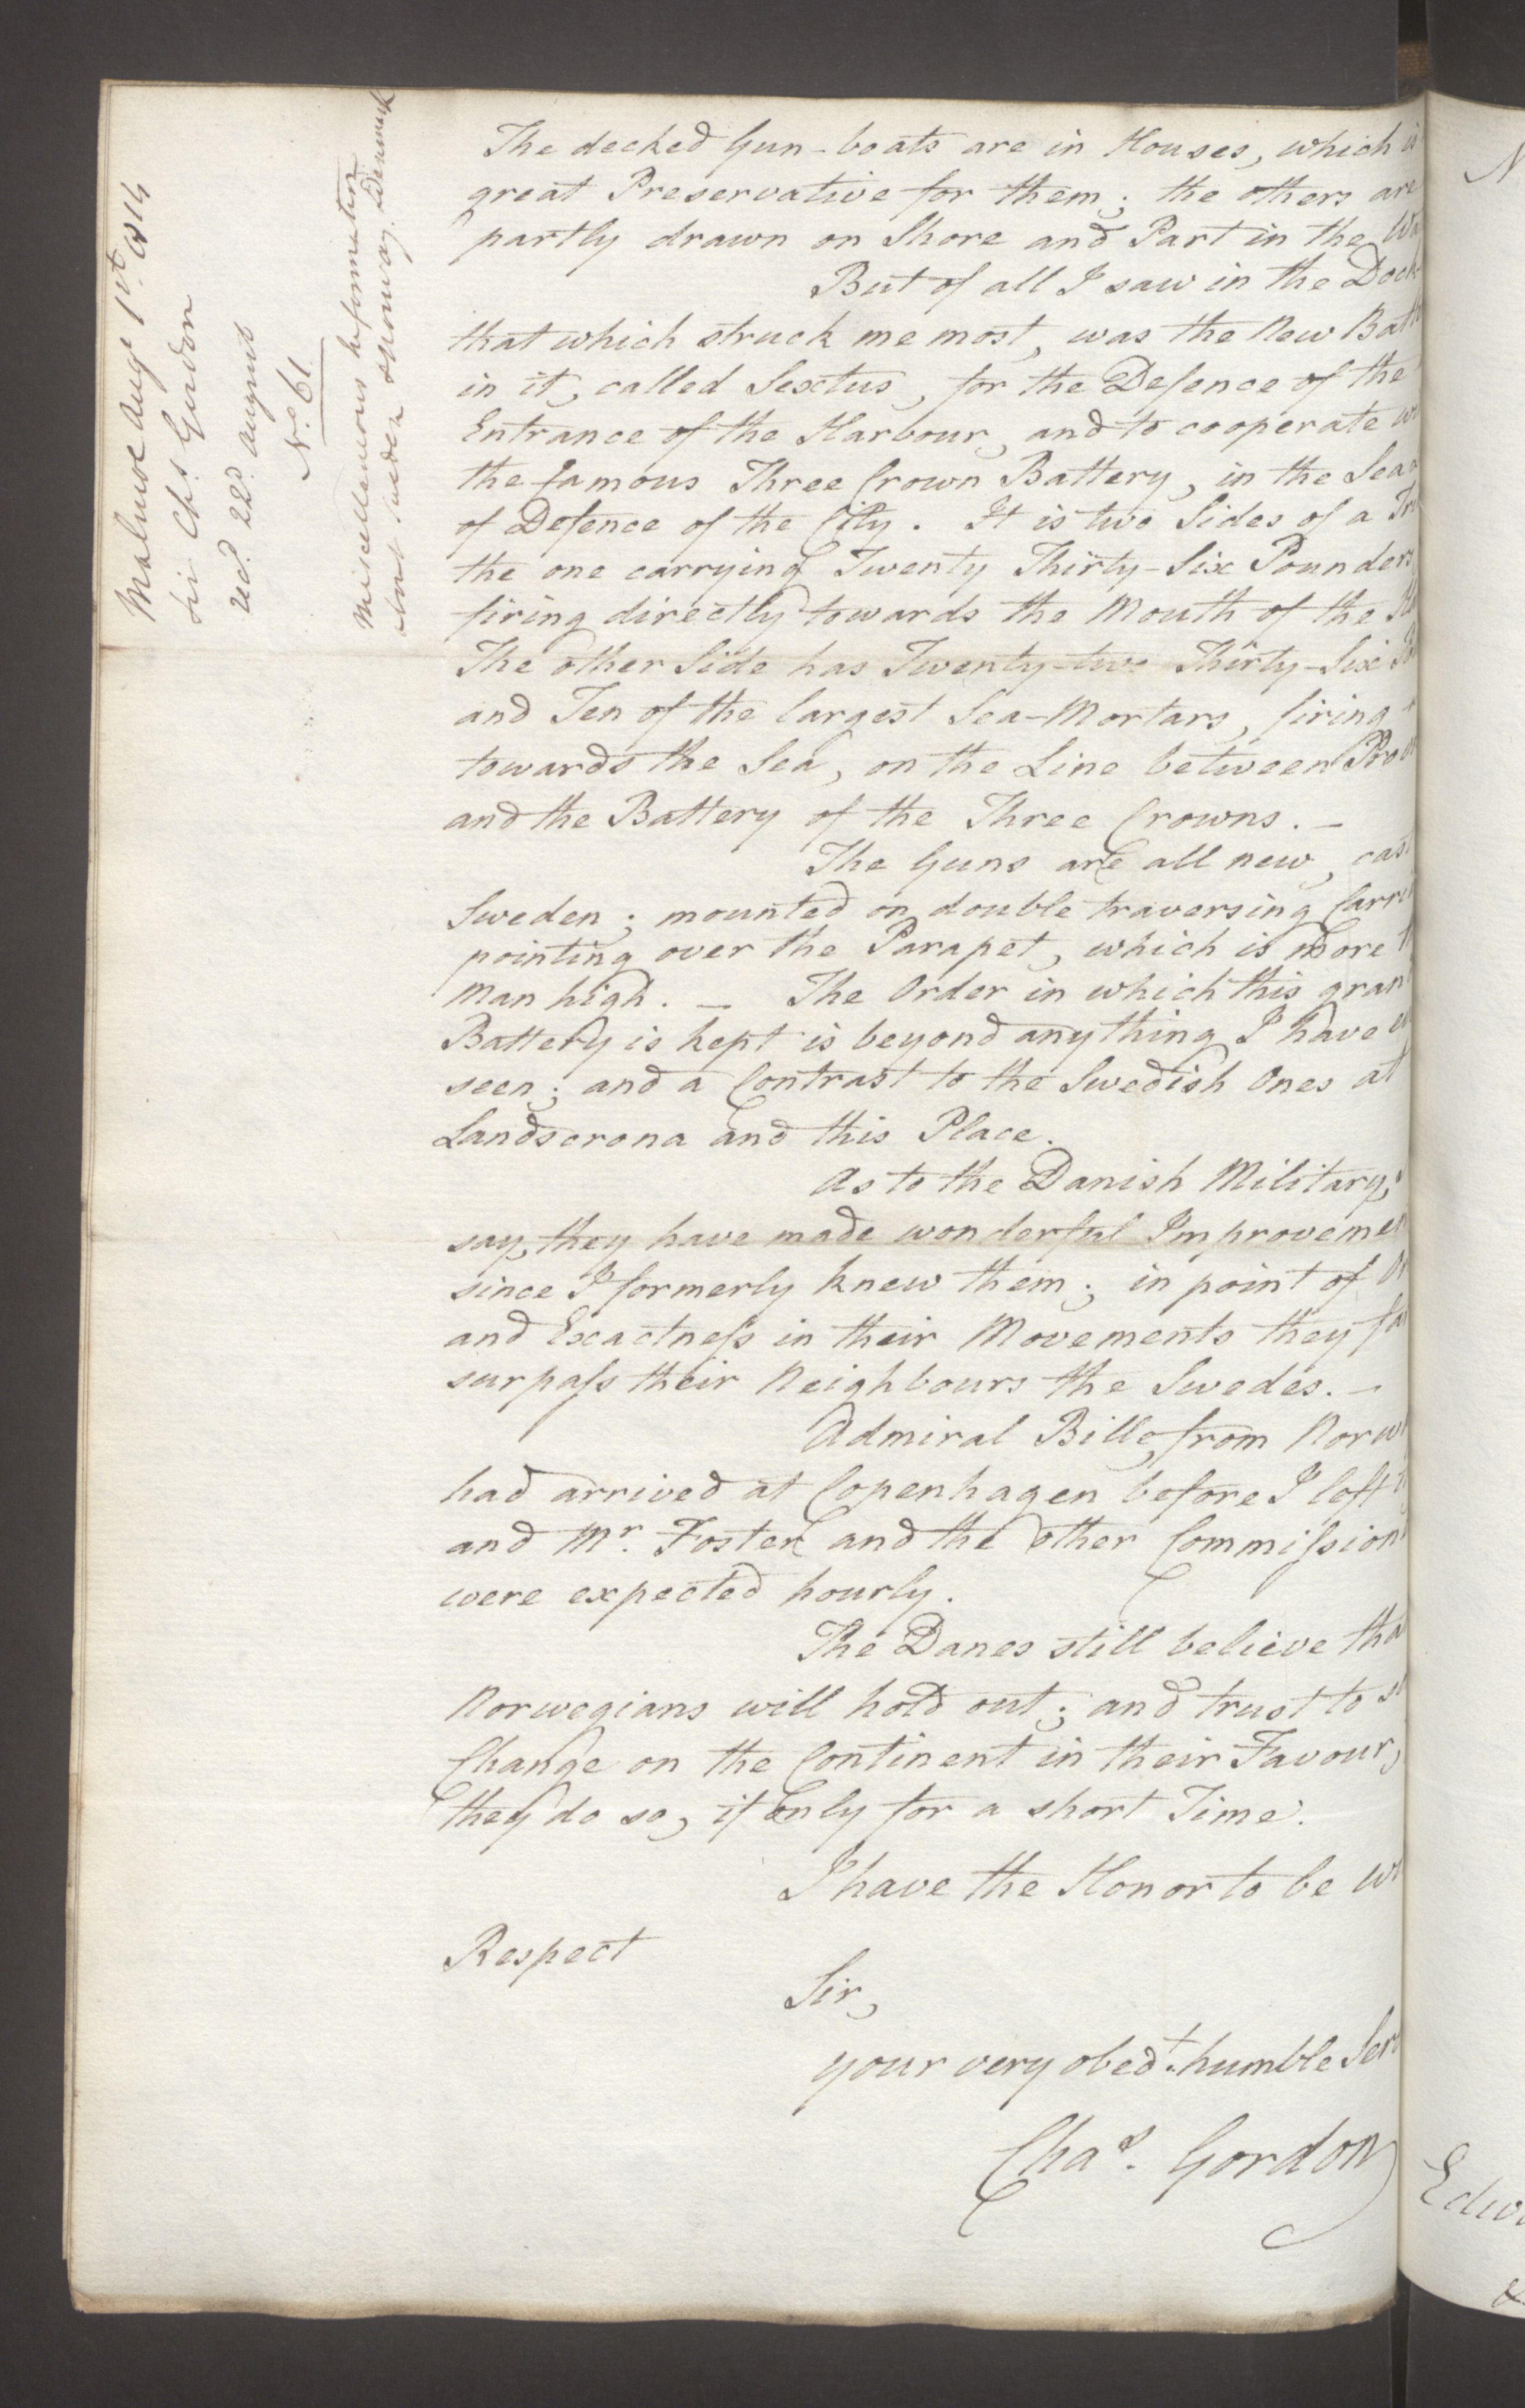 Foreign Office*, UKA/-/FO 38/16: Sir C. Gordon. Reports from Malmö, Jonkoping, and Helsingborg, 1814, s. 78